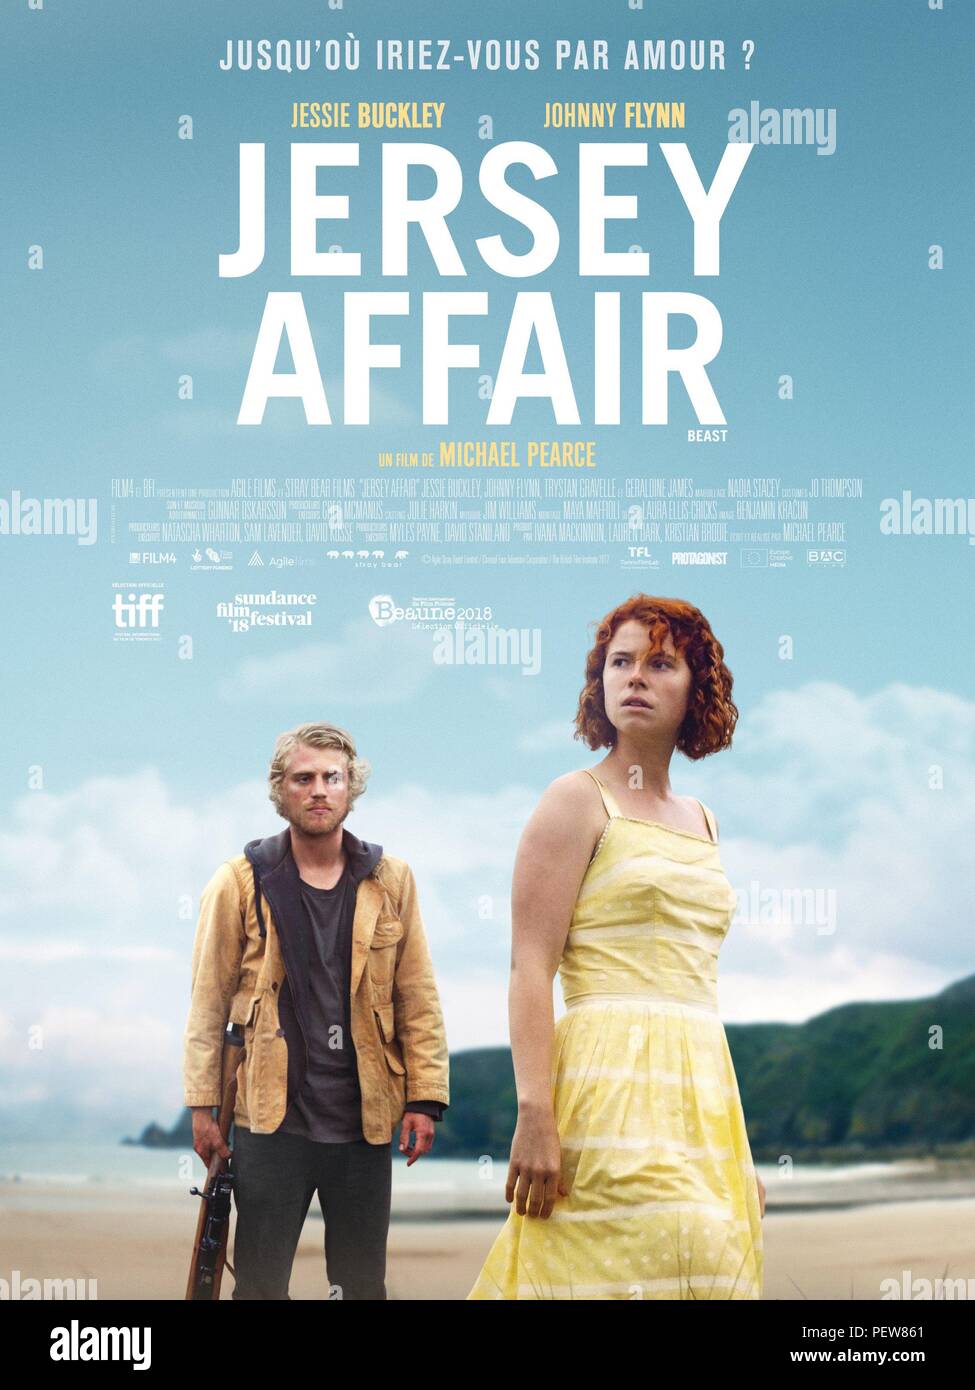 RELEASE DATE: May 11, 2018 TITLE: Beast aka Jersey Affair STUDIO:  Protagonist Pictures DIRECTOR: Michael Pearce PLOT: A troubled woman living  in an isolated community finds herself pulled between the control of